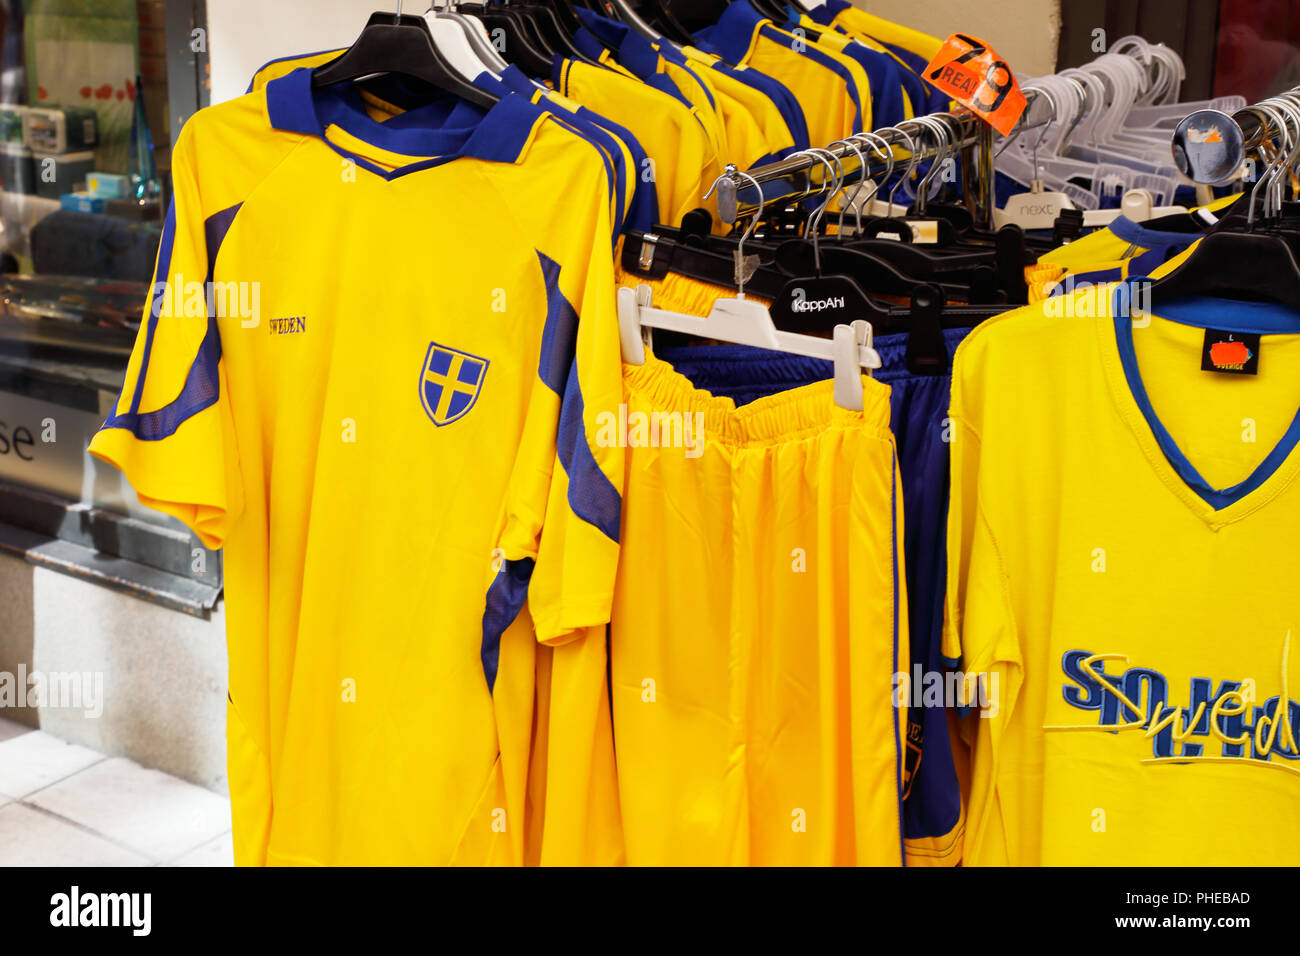 Stockholm, Sweden - July 12, 2018: Yellow souvenir football team suporter shirts with Swedish flags for sale at the Drottninggatan street in the downt Stock Photo